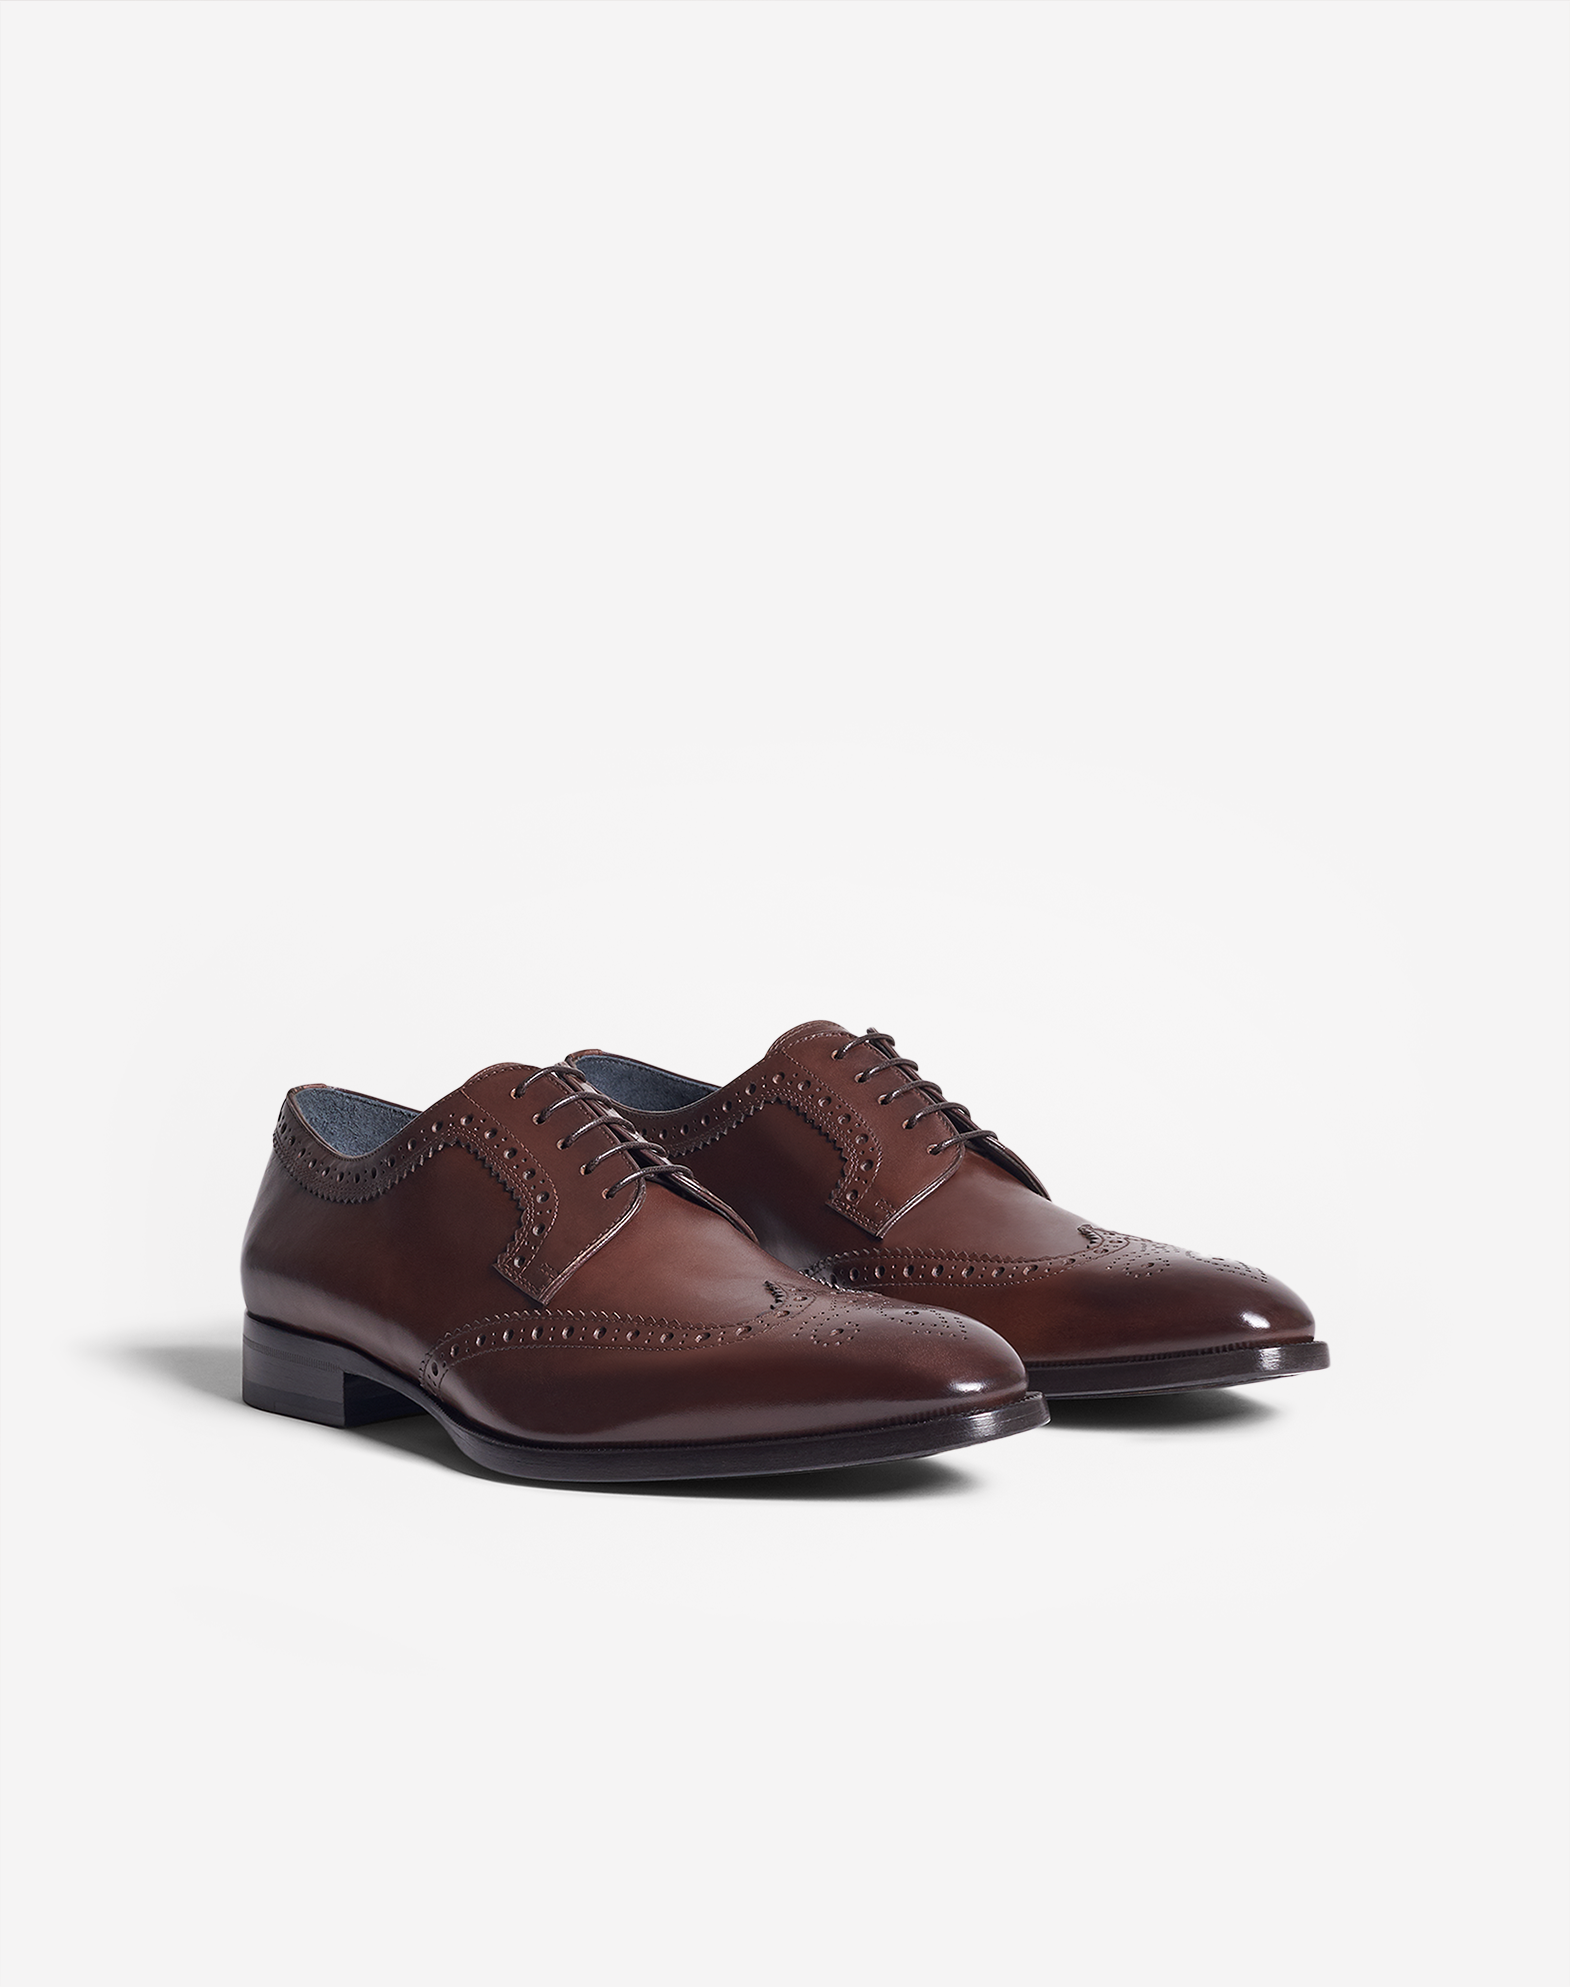 Dunhill Luxury Men's Brogues